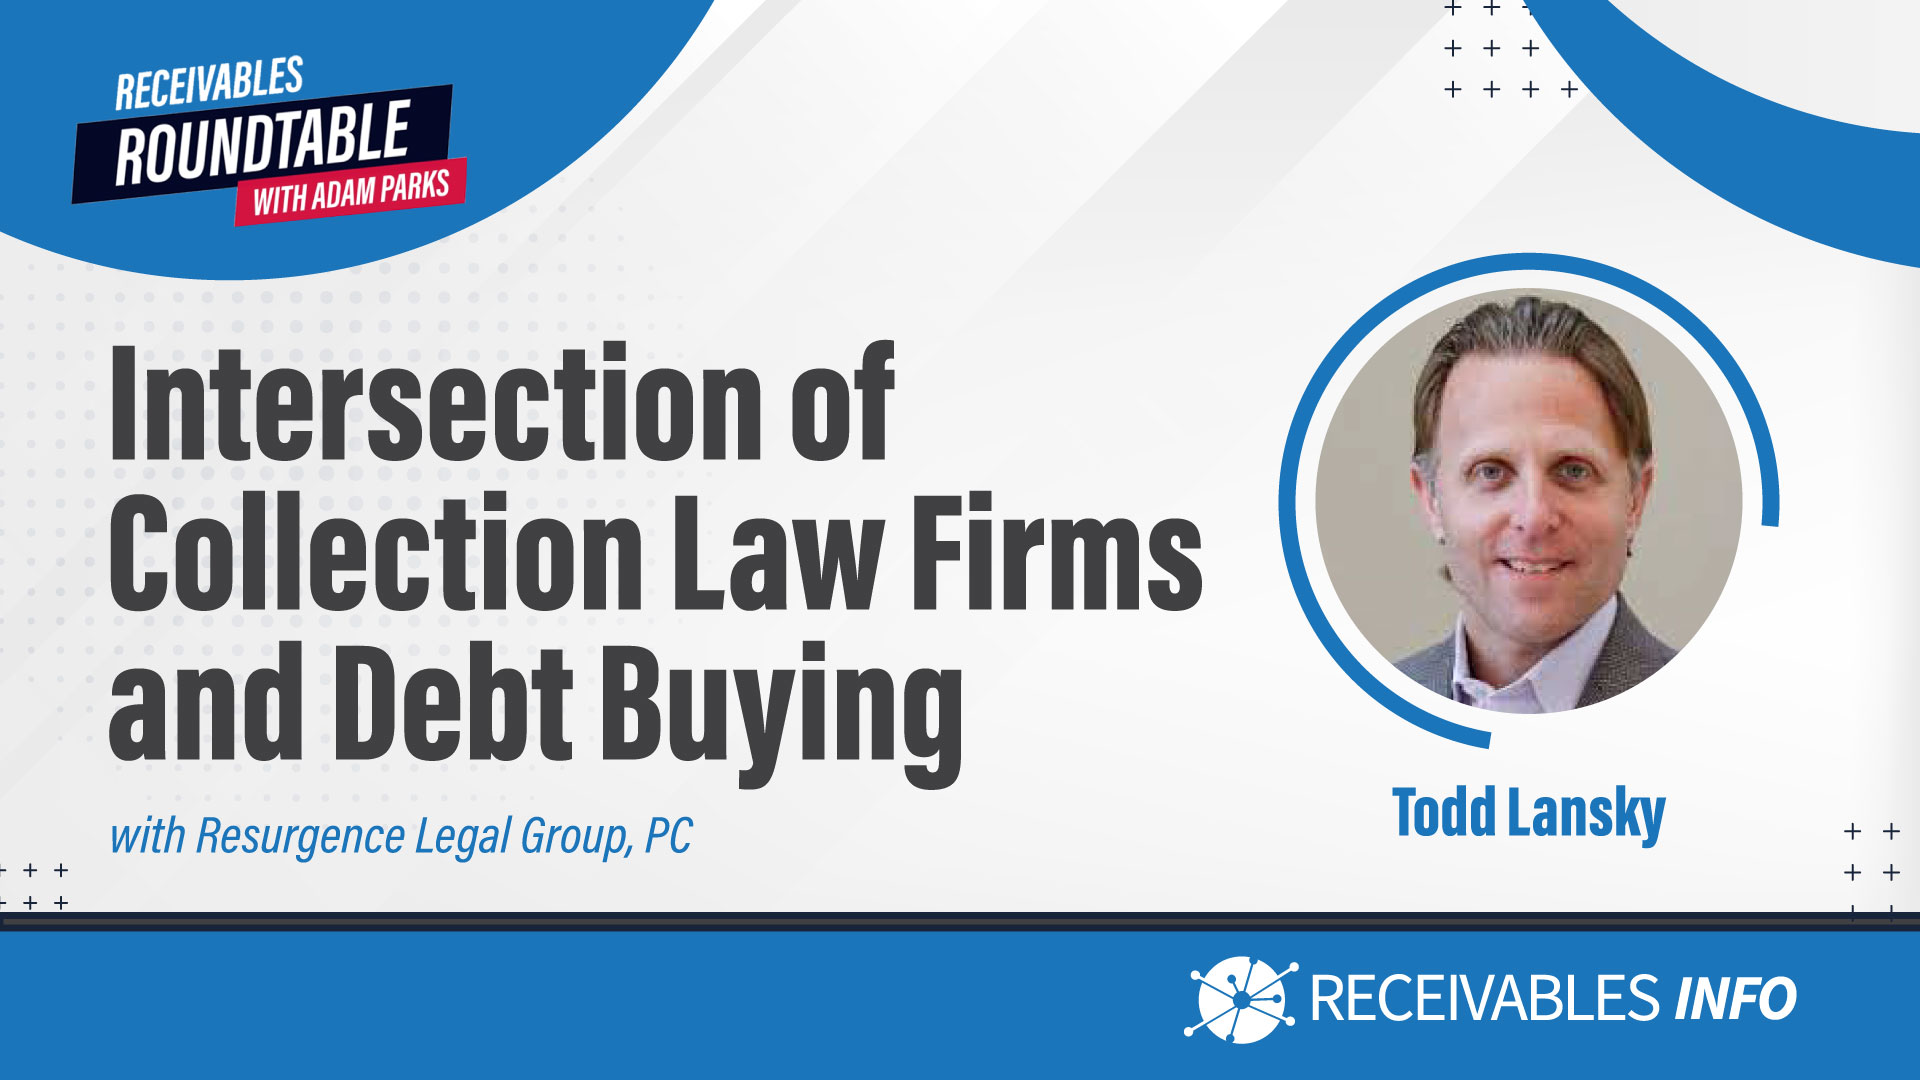 An image of a man with the words intersection of collection law firms and debt buying.